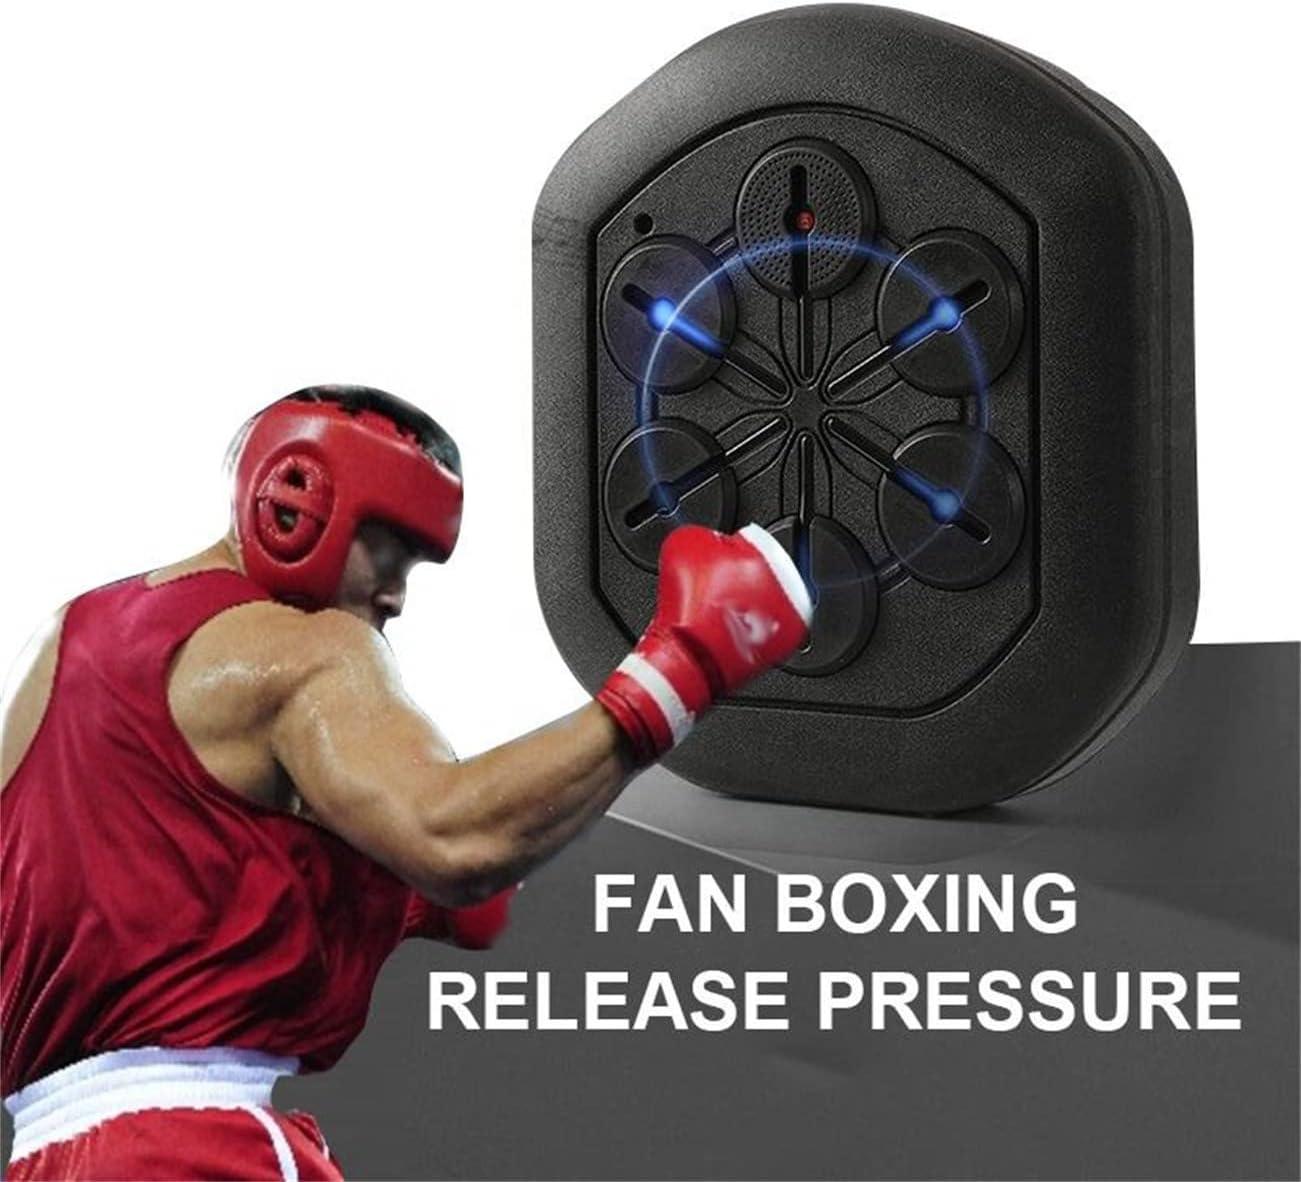 With Boxing Gloves Music Boxing Machine Easy To Use Boxing Punch